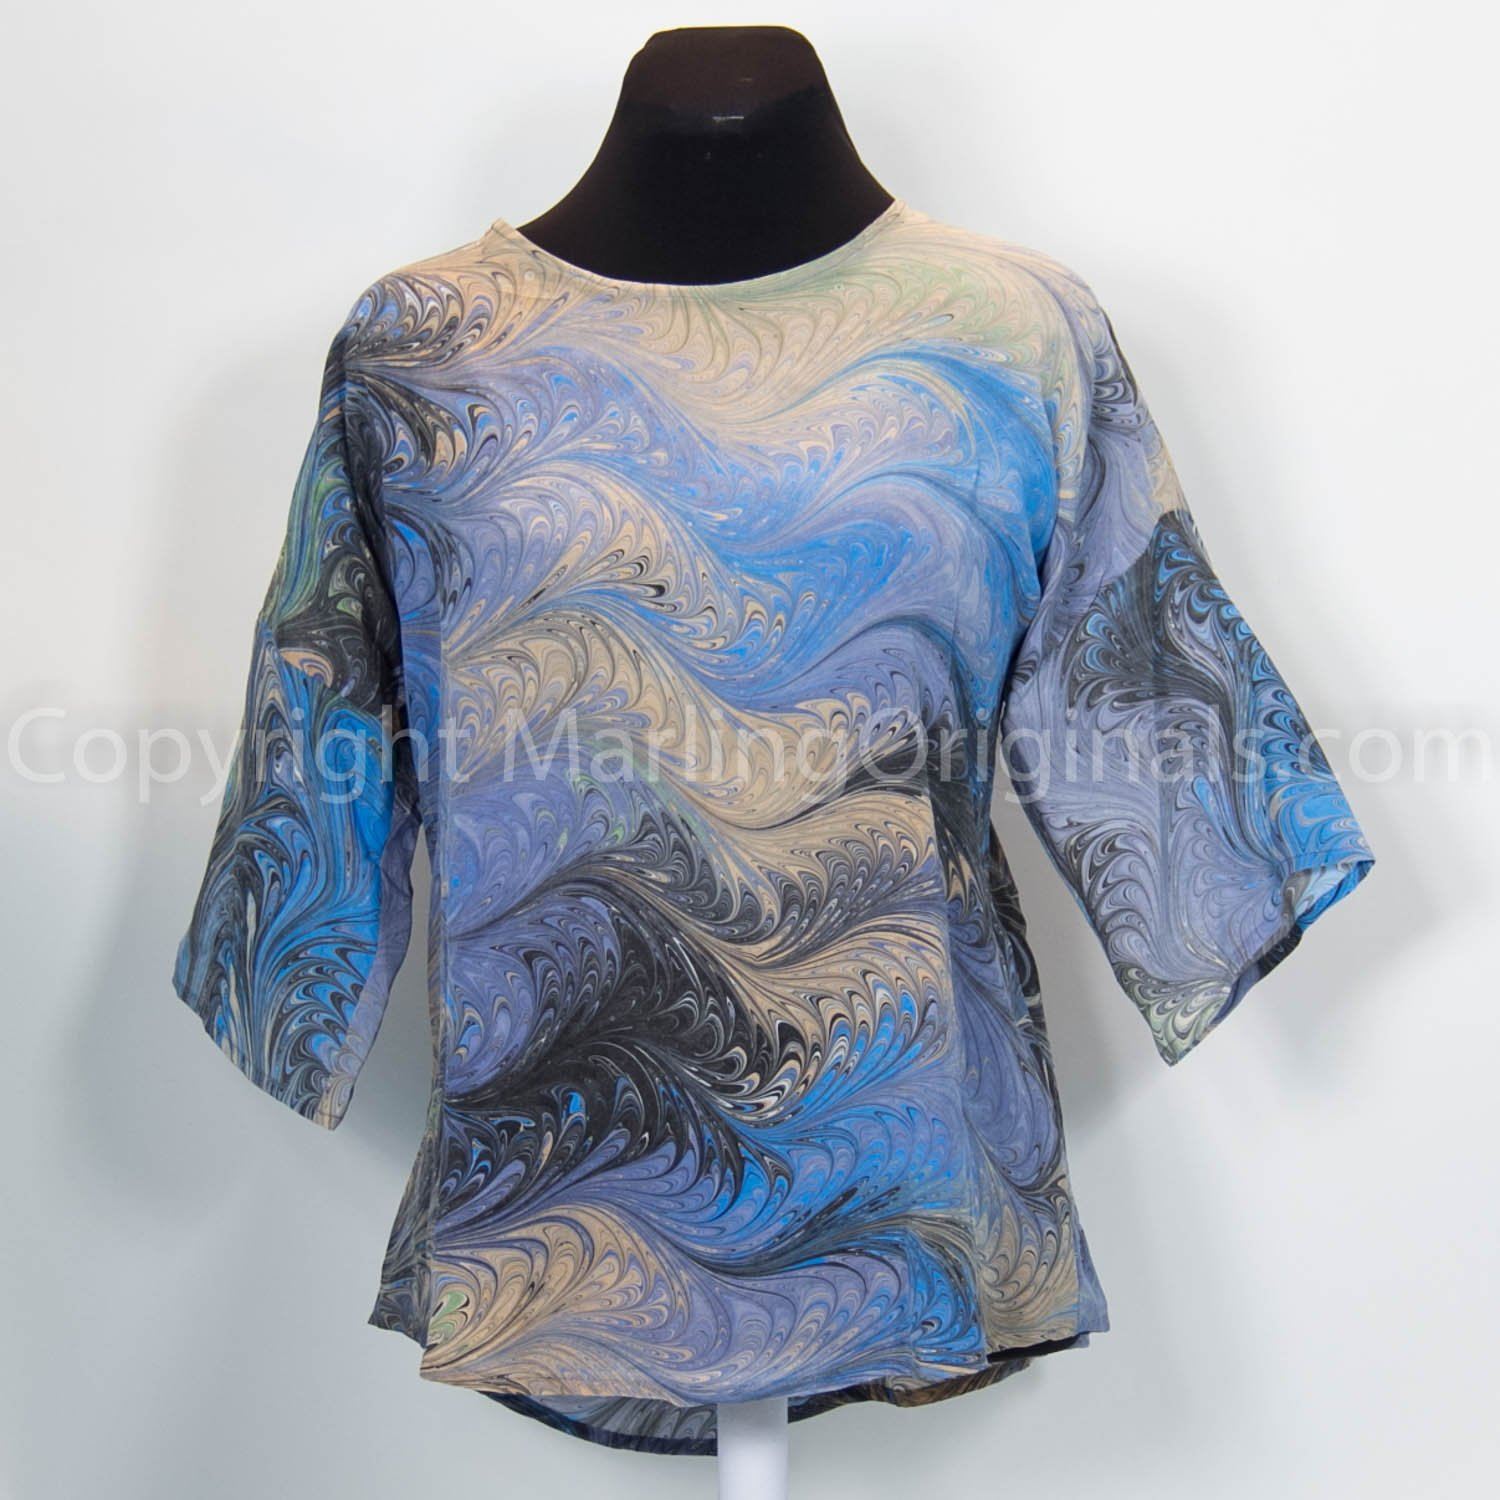 marbled silk top in grey, blues and peach colors.  Round neck, half sleeve, flattering cut.